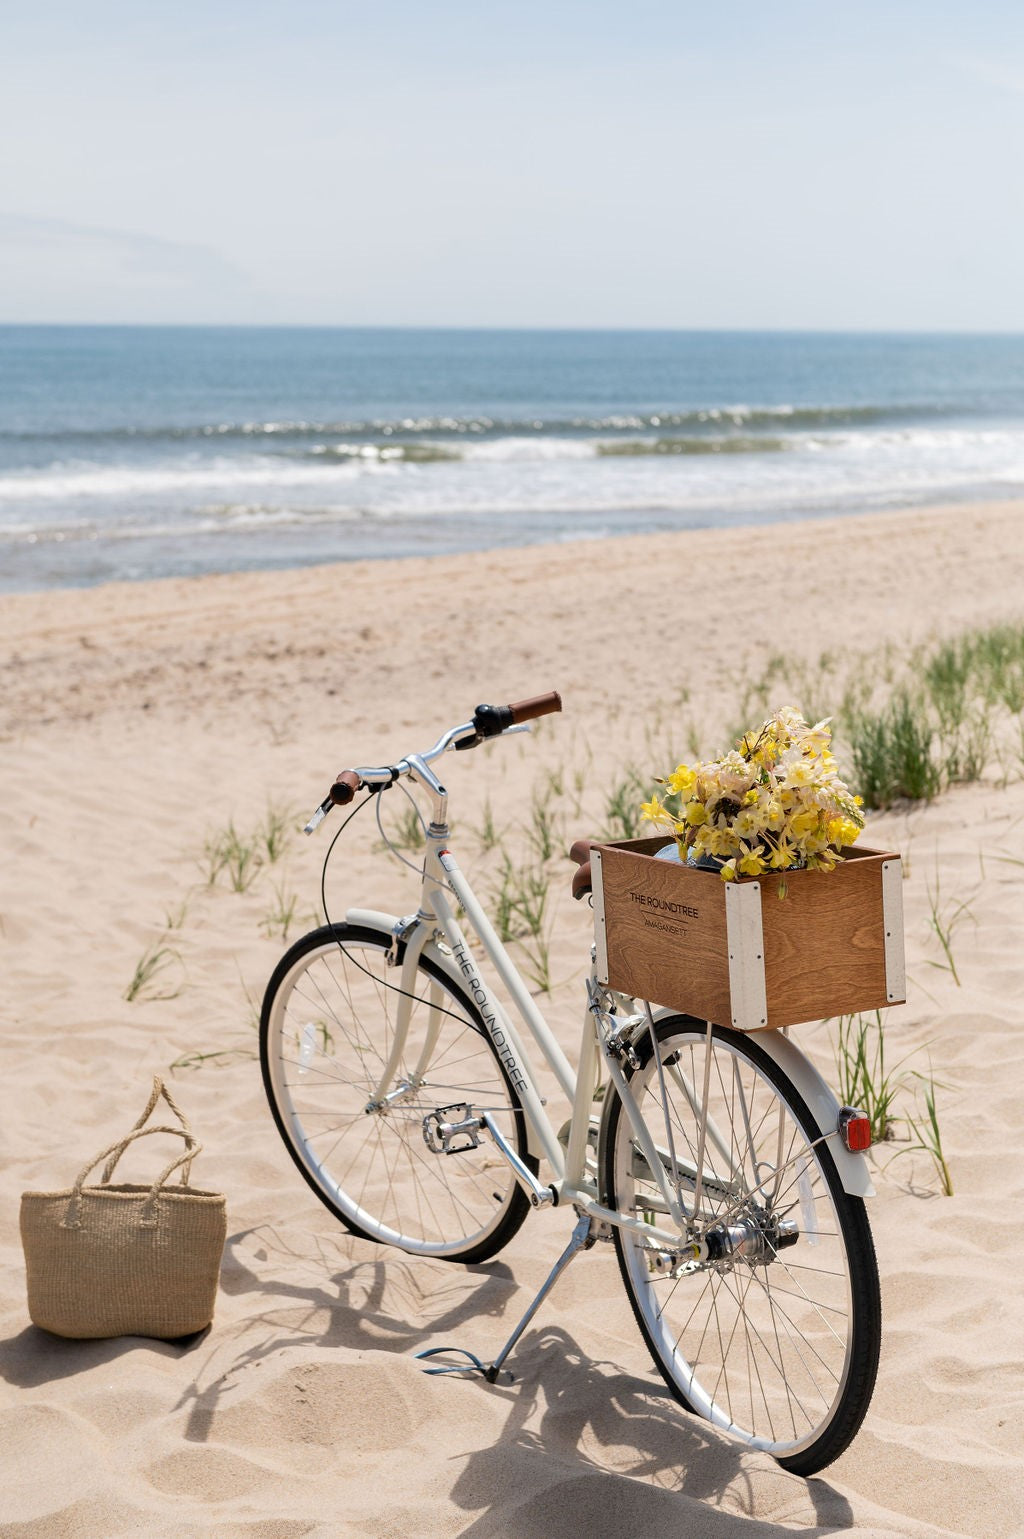 Ivory Franklin 3 on the beach with a wooden rear crate with yellow flowers